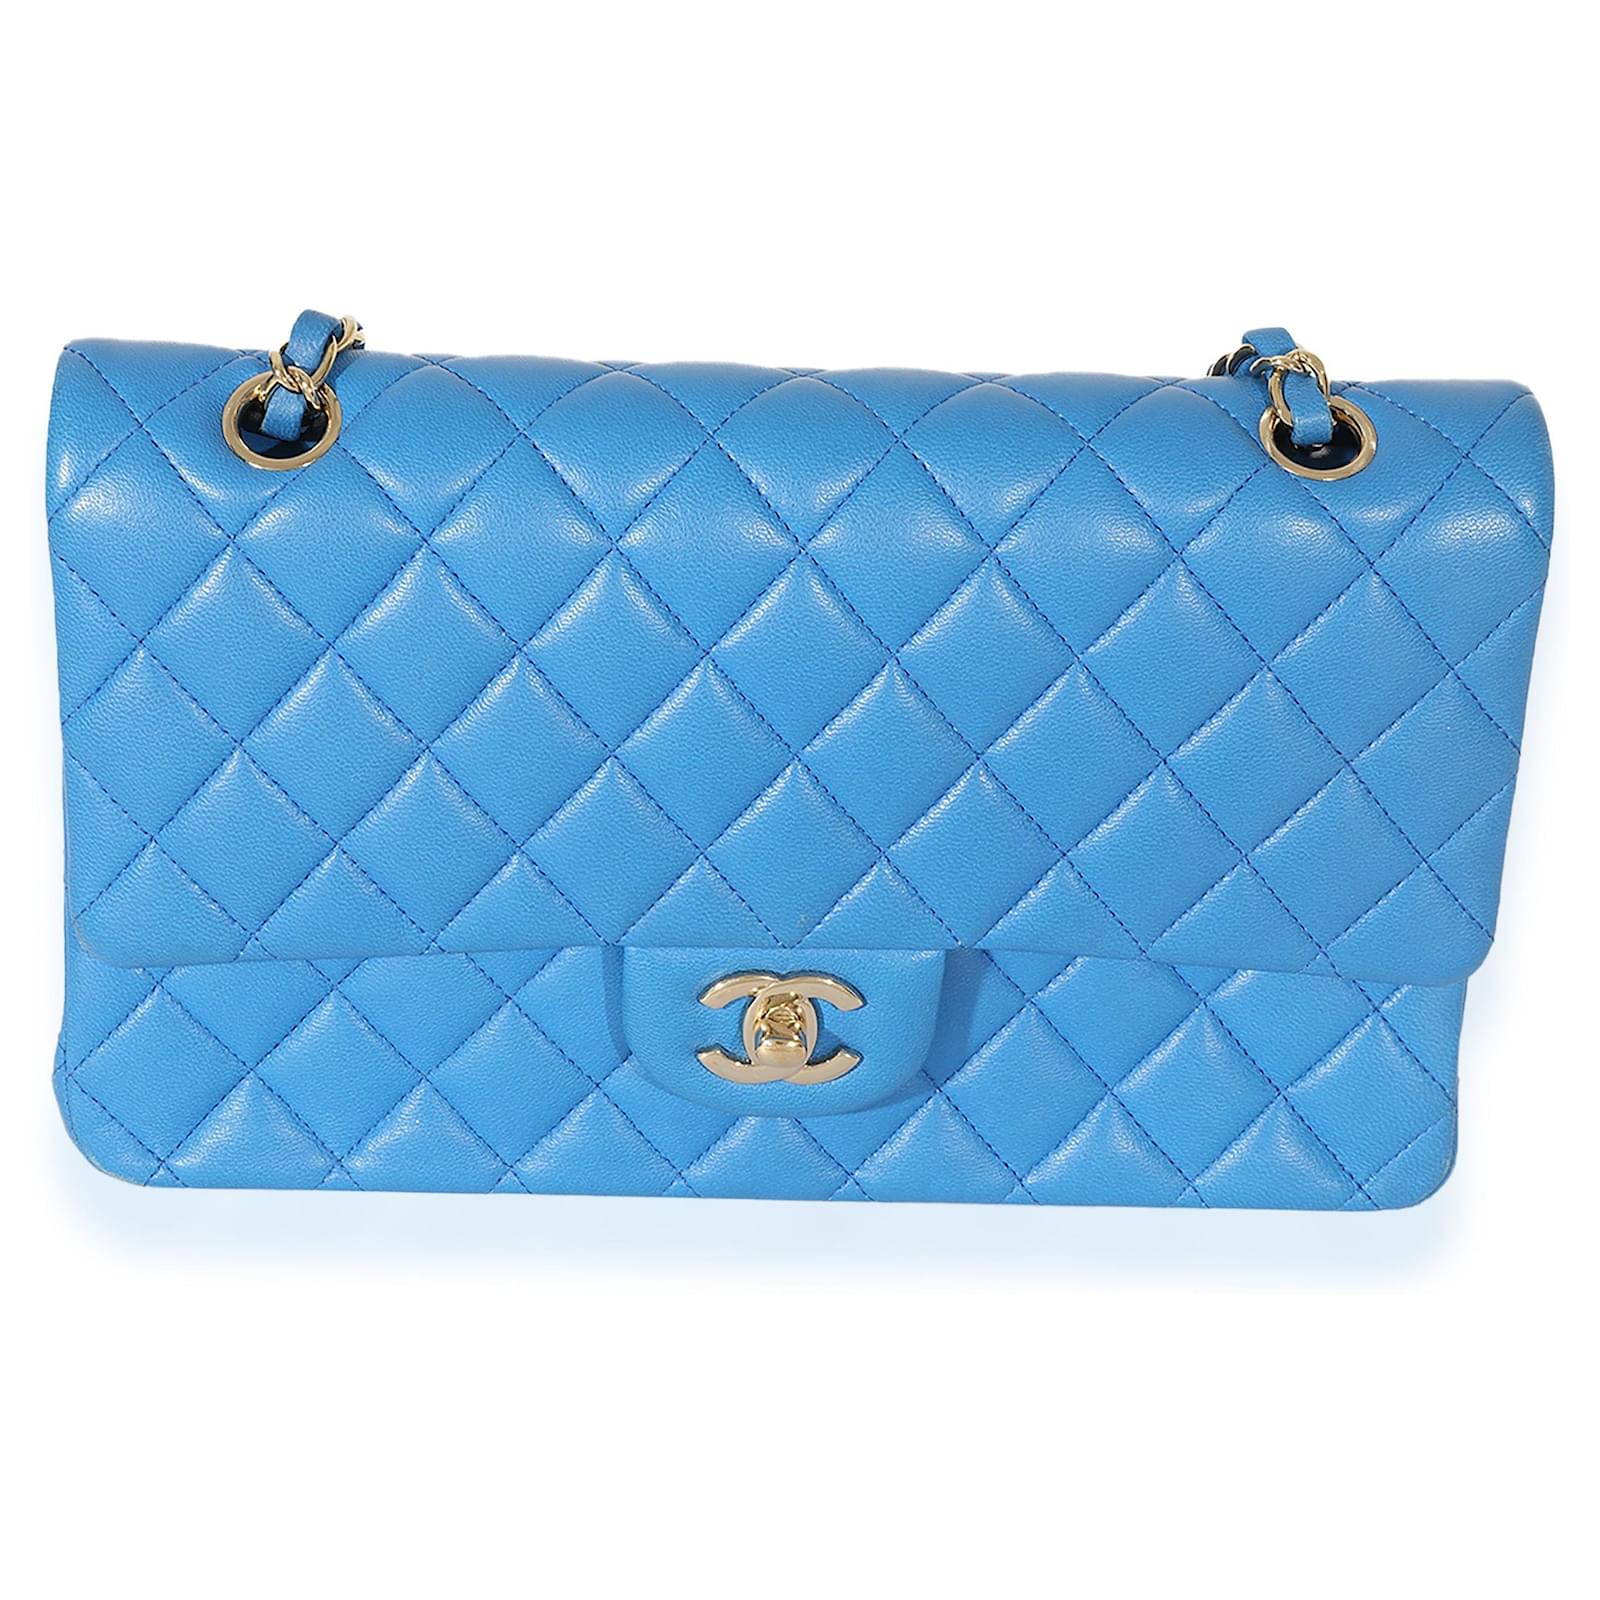 Timeless Chanel Blue Quilted Lambskin Medium Double Flap Bag